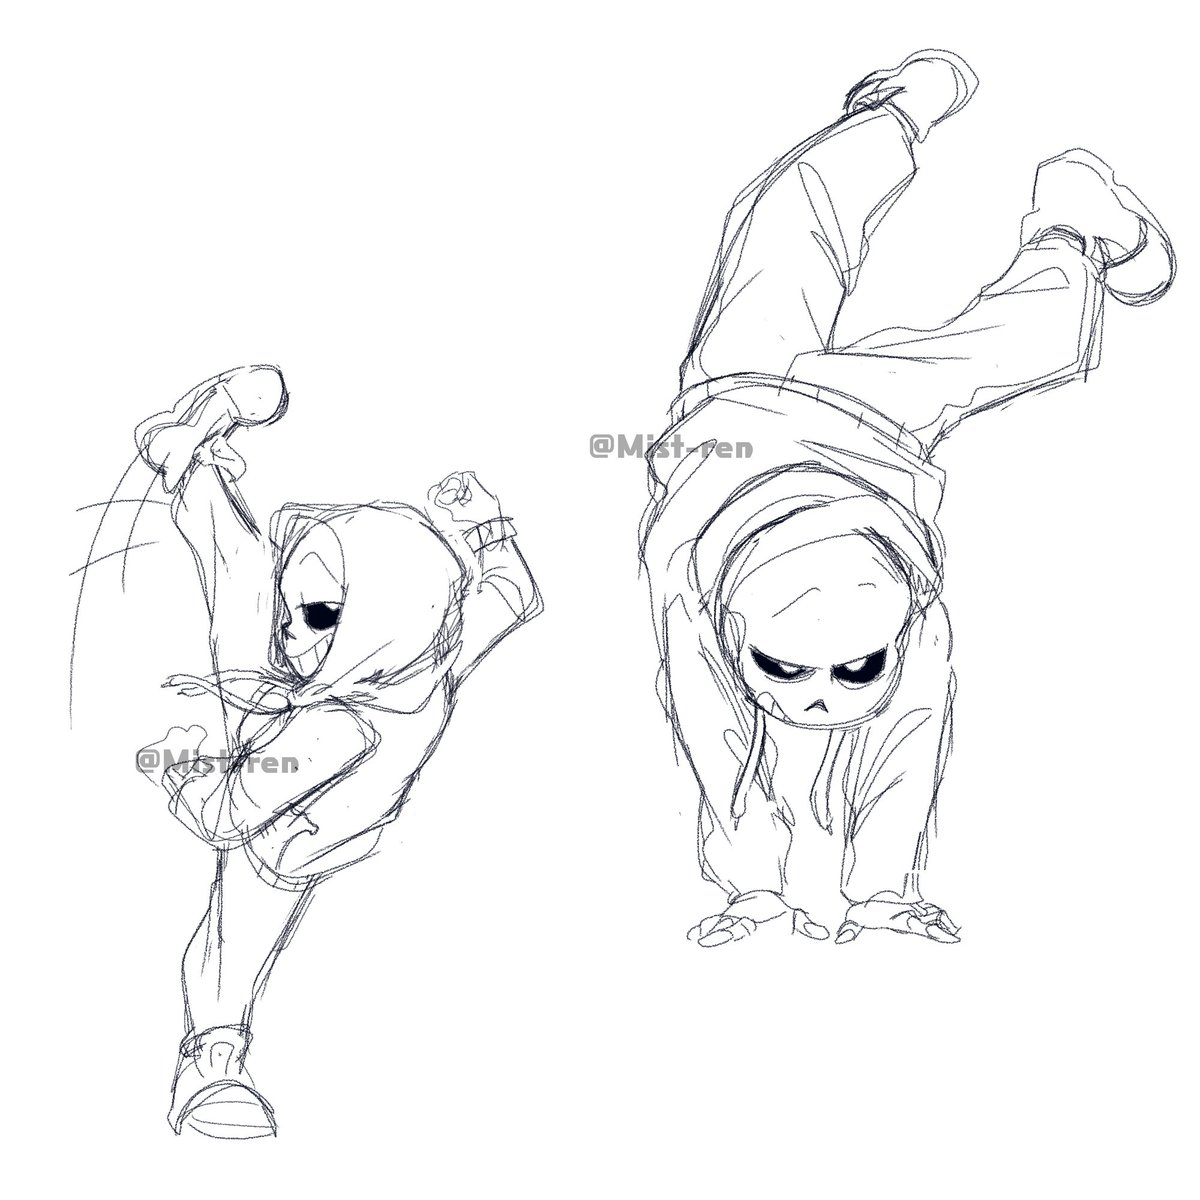 Mist Ren Taking A Break On Twitter Practicing Dancing Poses For Dance And Lust Dancetalesans Underlustsans Undertaleaus Dancesans Lustsans Sanses Undertale Https T Co 1agu1rvvvz Yoga lord of the dance pose icon. twitter